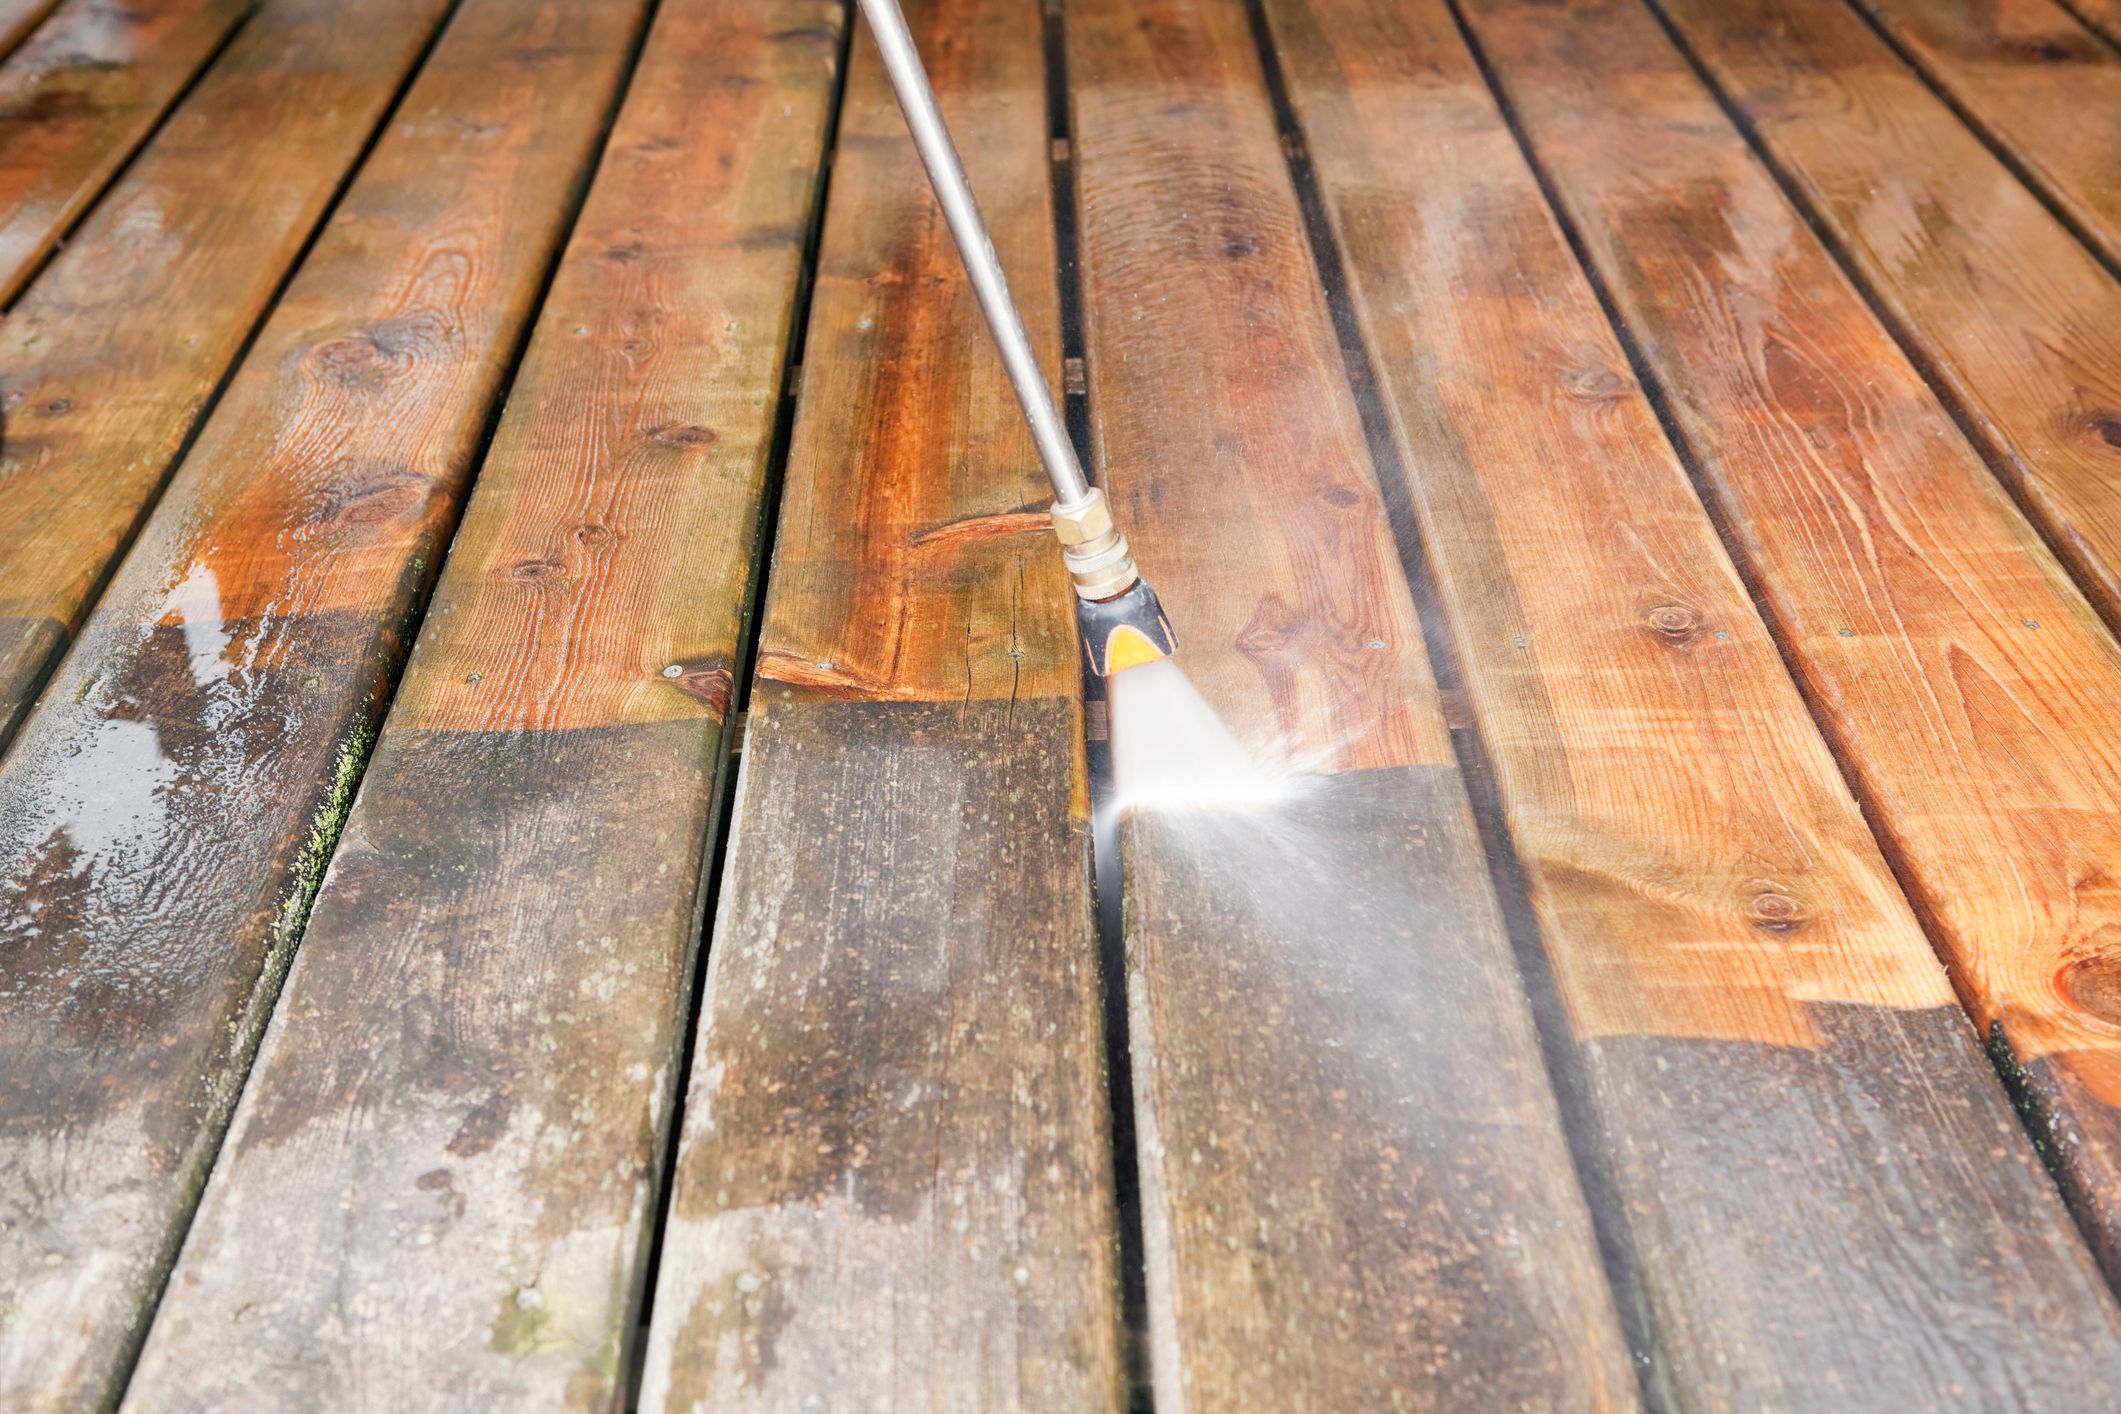 How to Use Pressure Washing - How to Pressure Wash House and Driveway